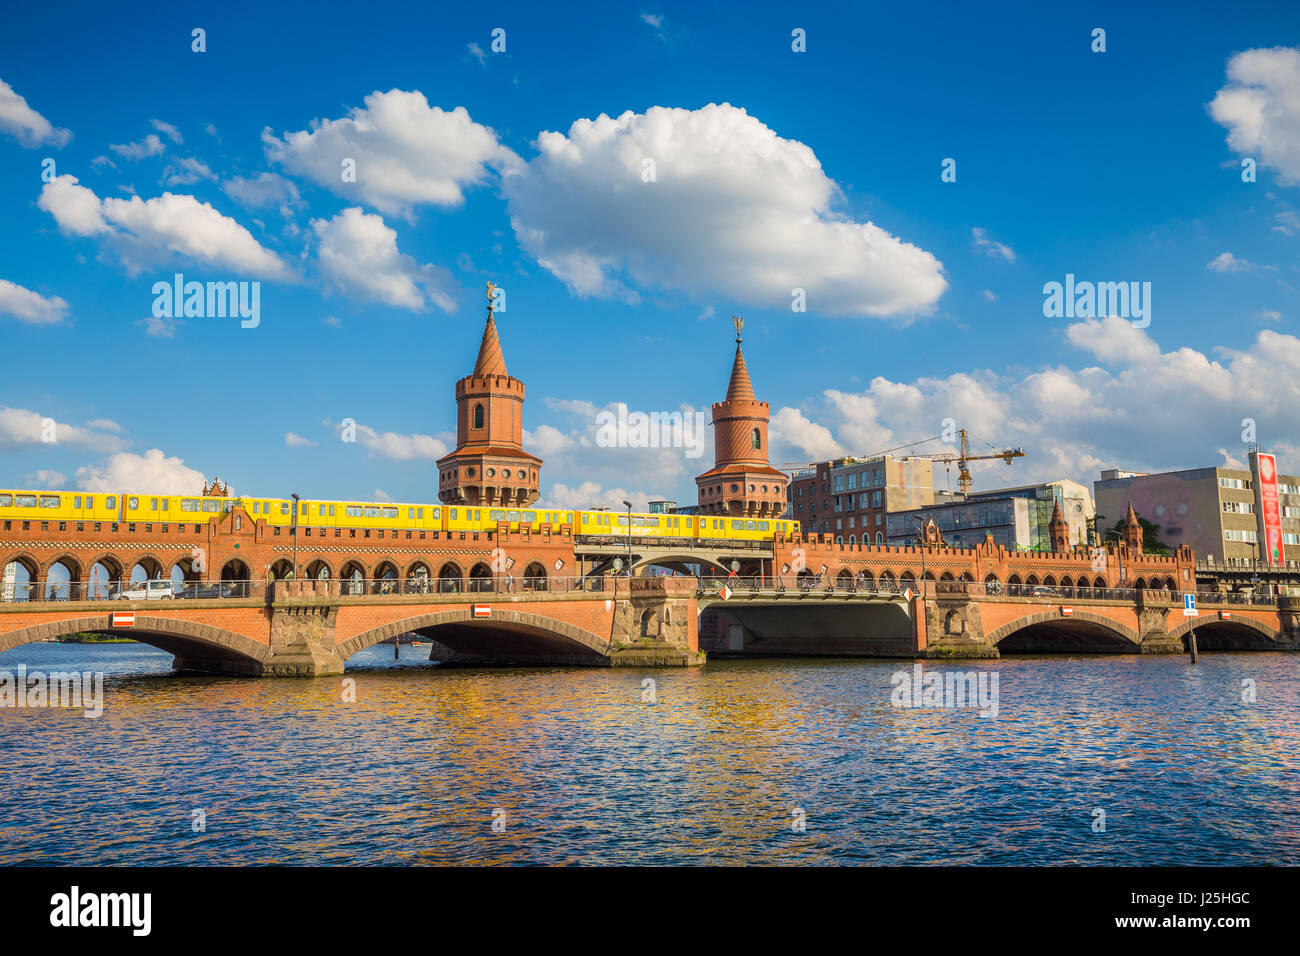 Classic panoramic view of famous Oberbaum Bridge with historic Berliner U-Bahn crossing the Spree river on a sunny day with blue sky, Berlin, Germany Stock Photo